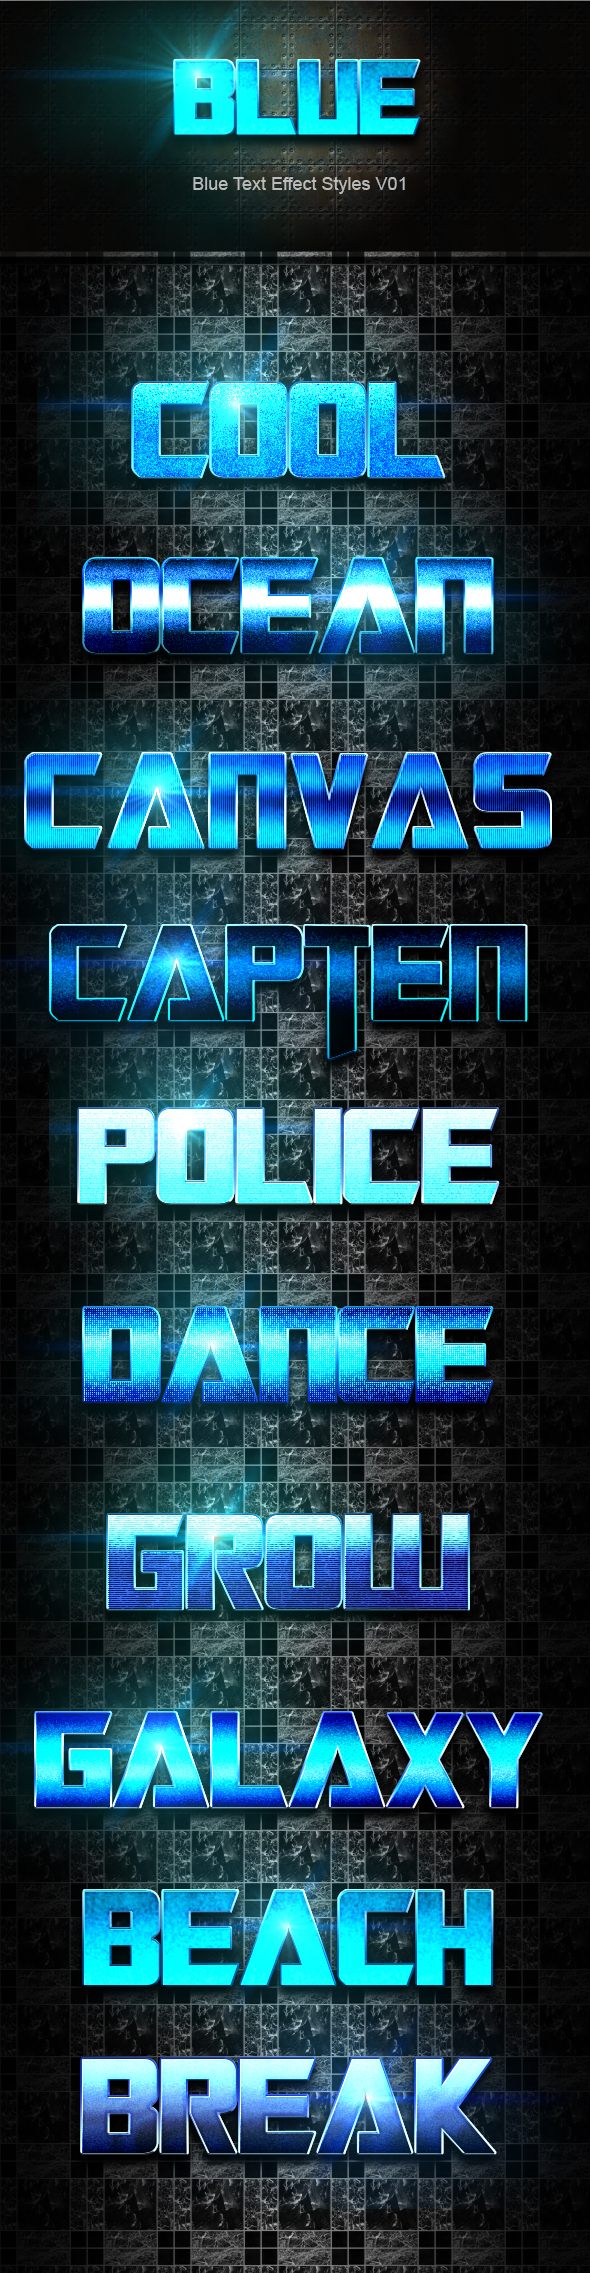 Blue Text Effect Styles V01